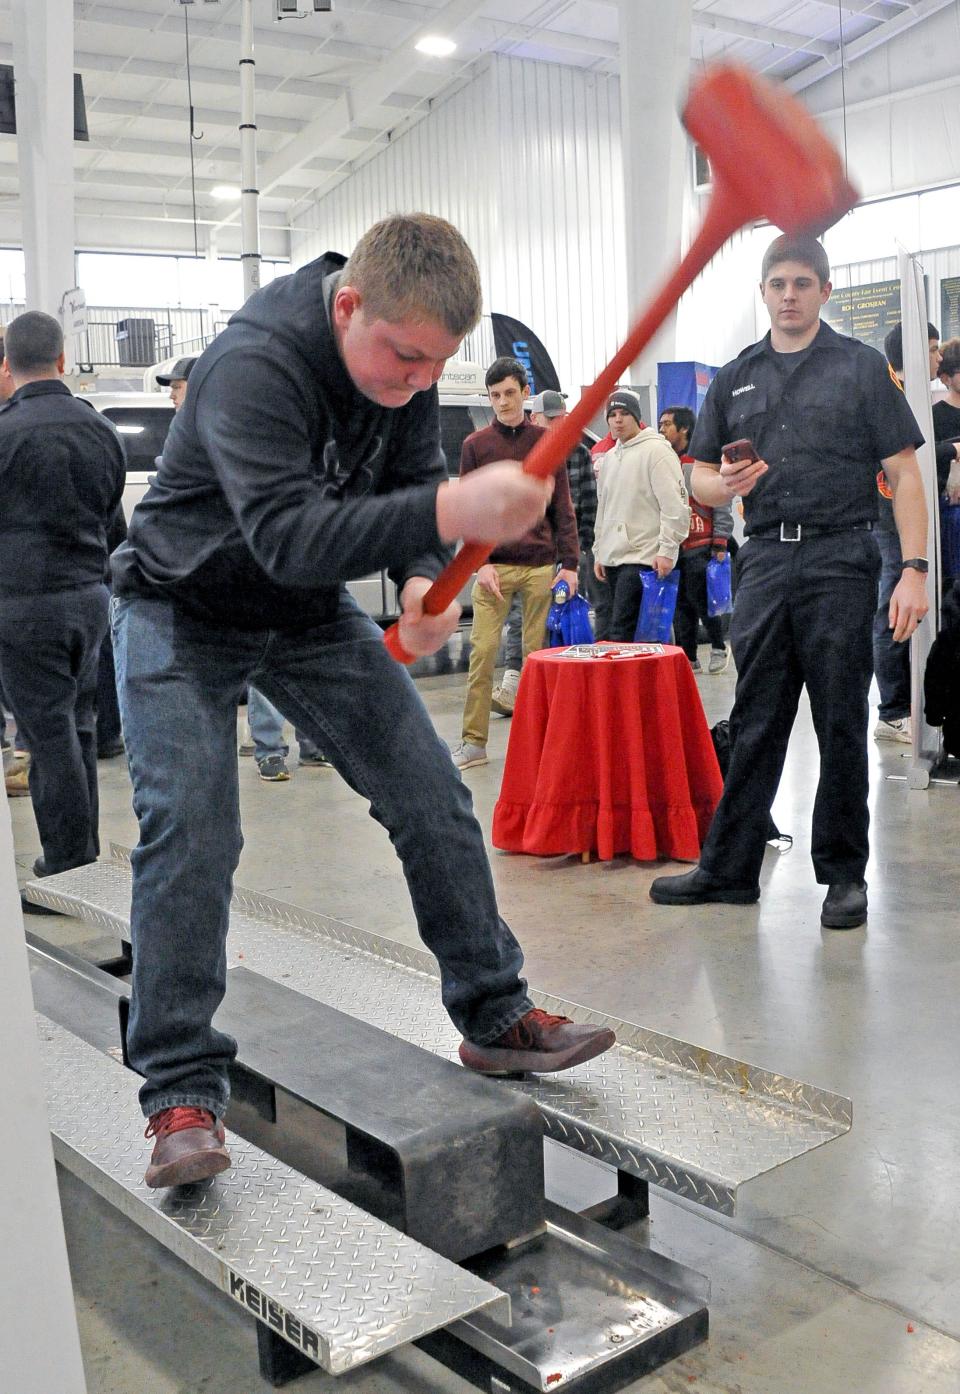 Brent Underwood of Norwayne High School uses a sledge hammer to move a weight in a timed activity at the Ashland Fire Department booth at JA Inspire.